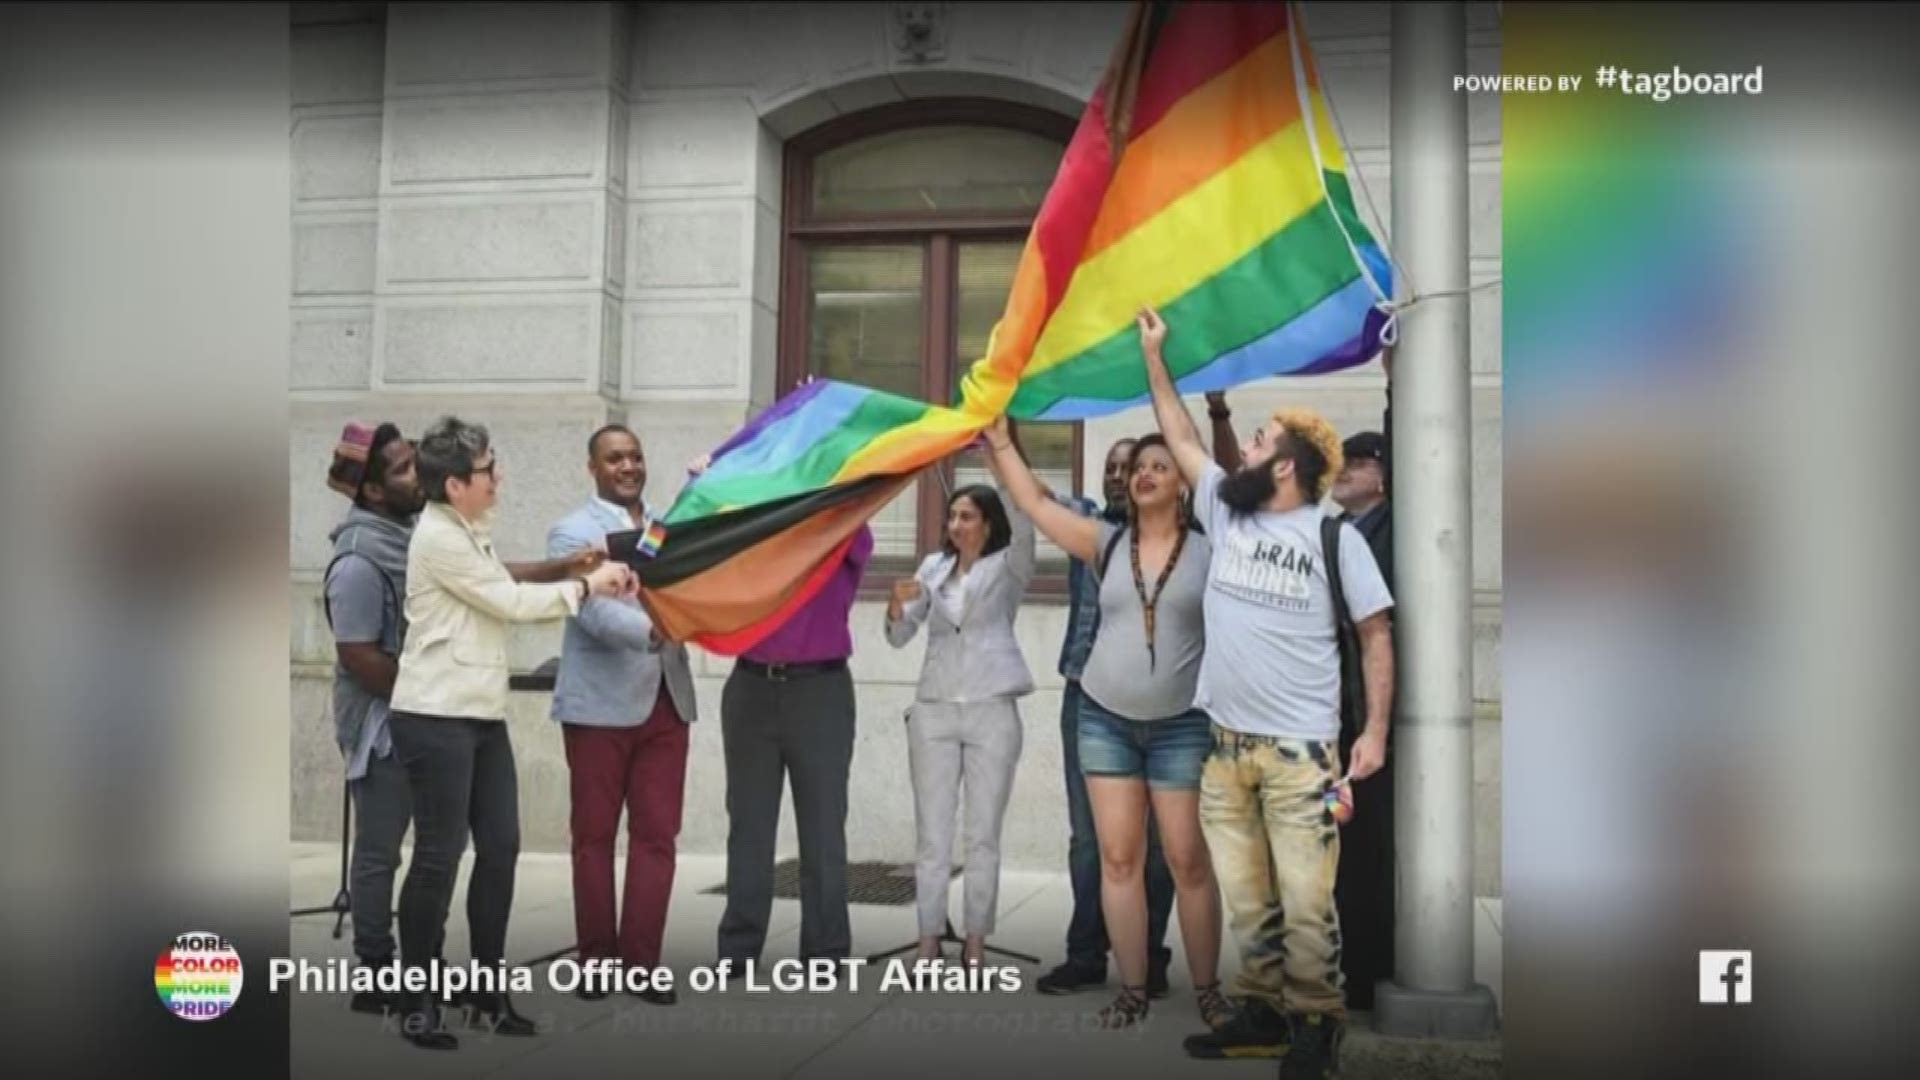 Two stripes were added to the rainbow Pride flag in Philadelphia to address what they believe is racial inequality in the gay community (June 23, 2017)